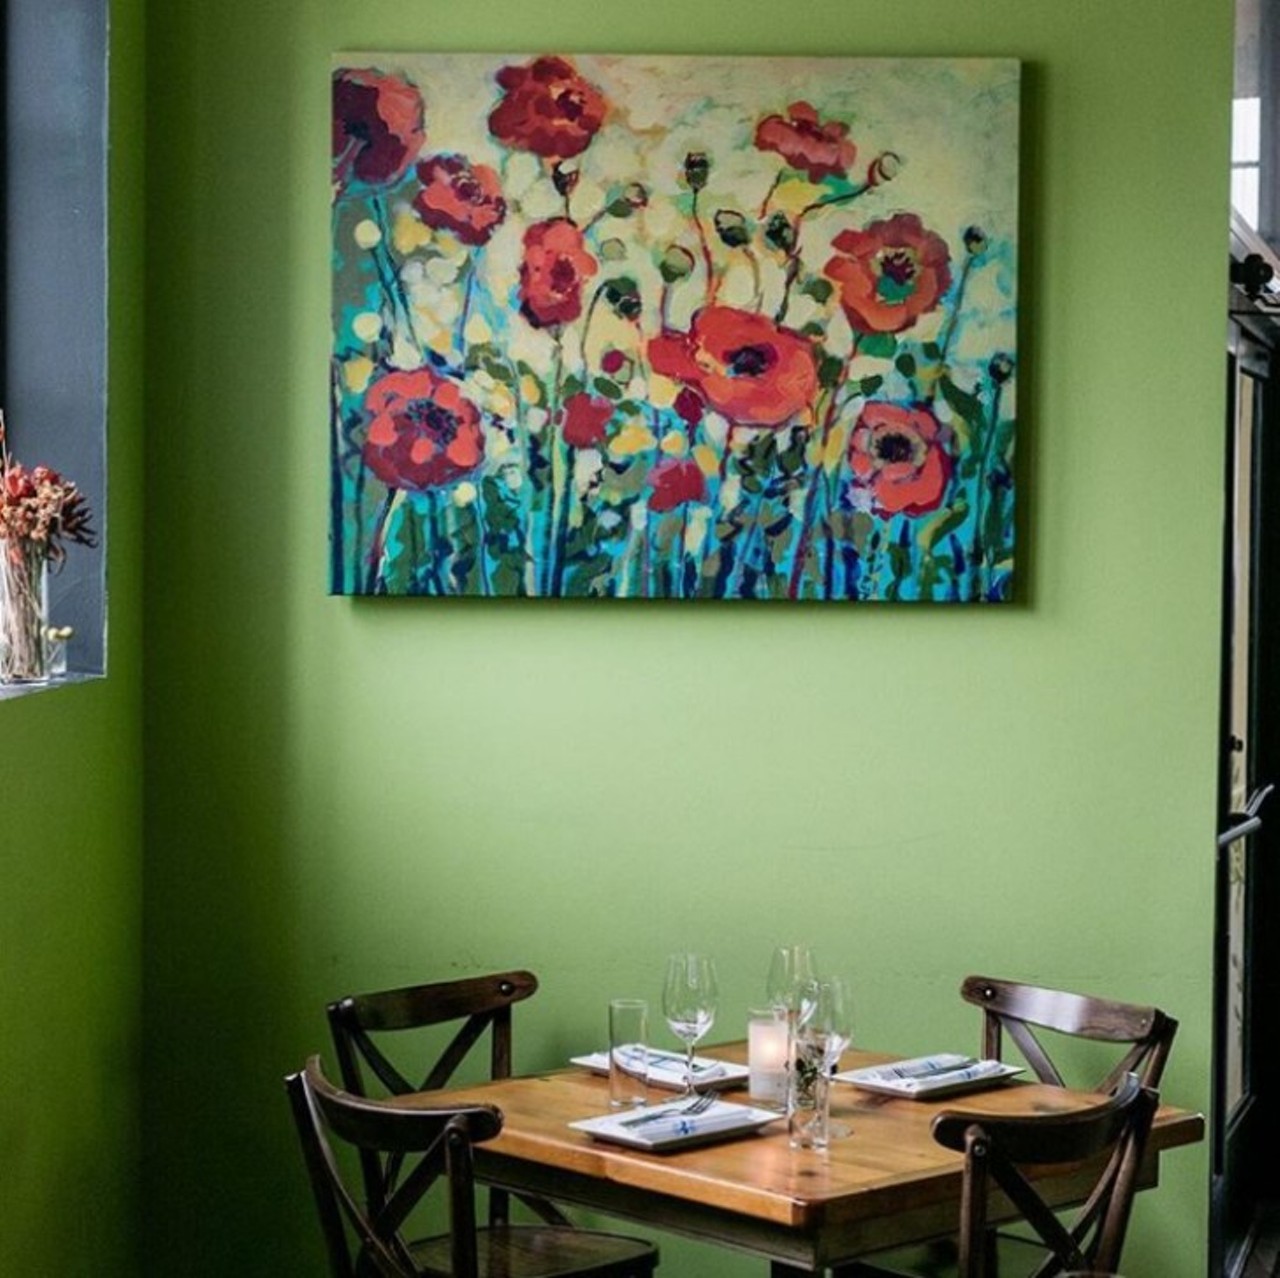 Chartreuse Kitchen & Cocktails
15 E. Kirby Ste. D, Detroit
This restaurant in Midtown includes bright green walls and furniture, and is filled with plenty of flowers and herbs to make for a picturesque dining experience.
Photo courtesy of @chartreusedetroit